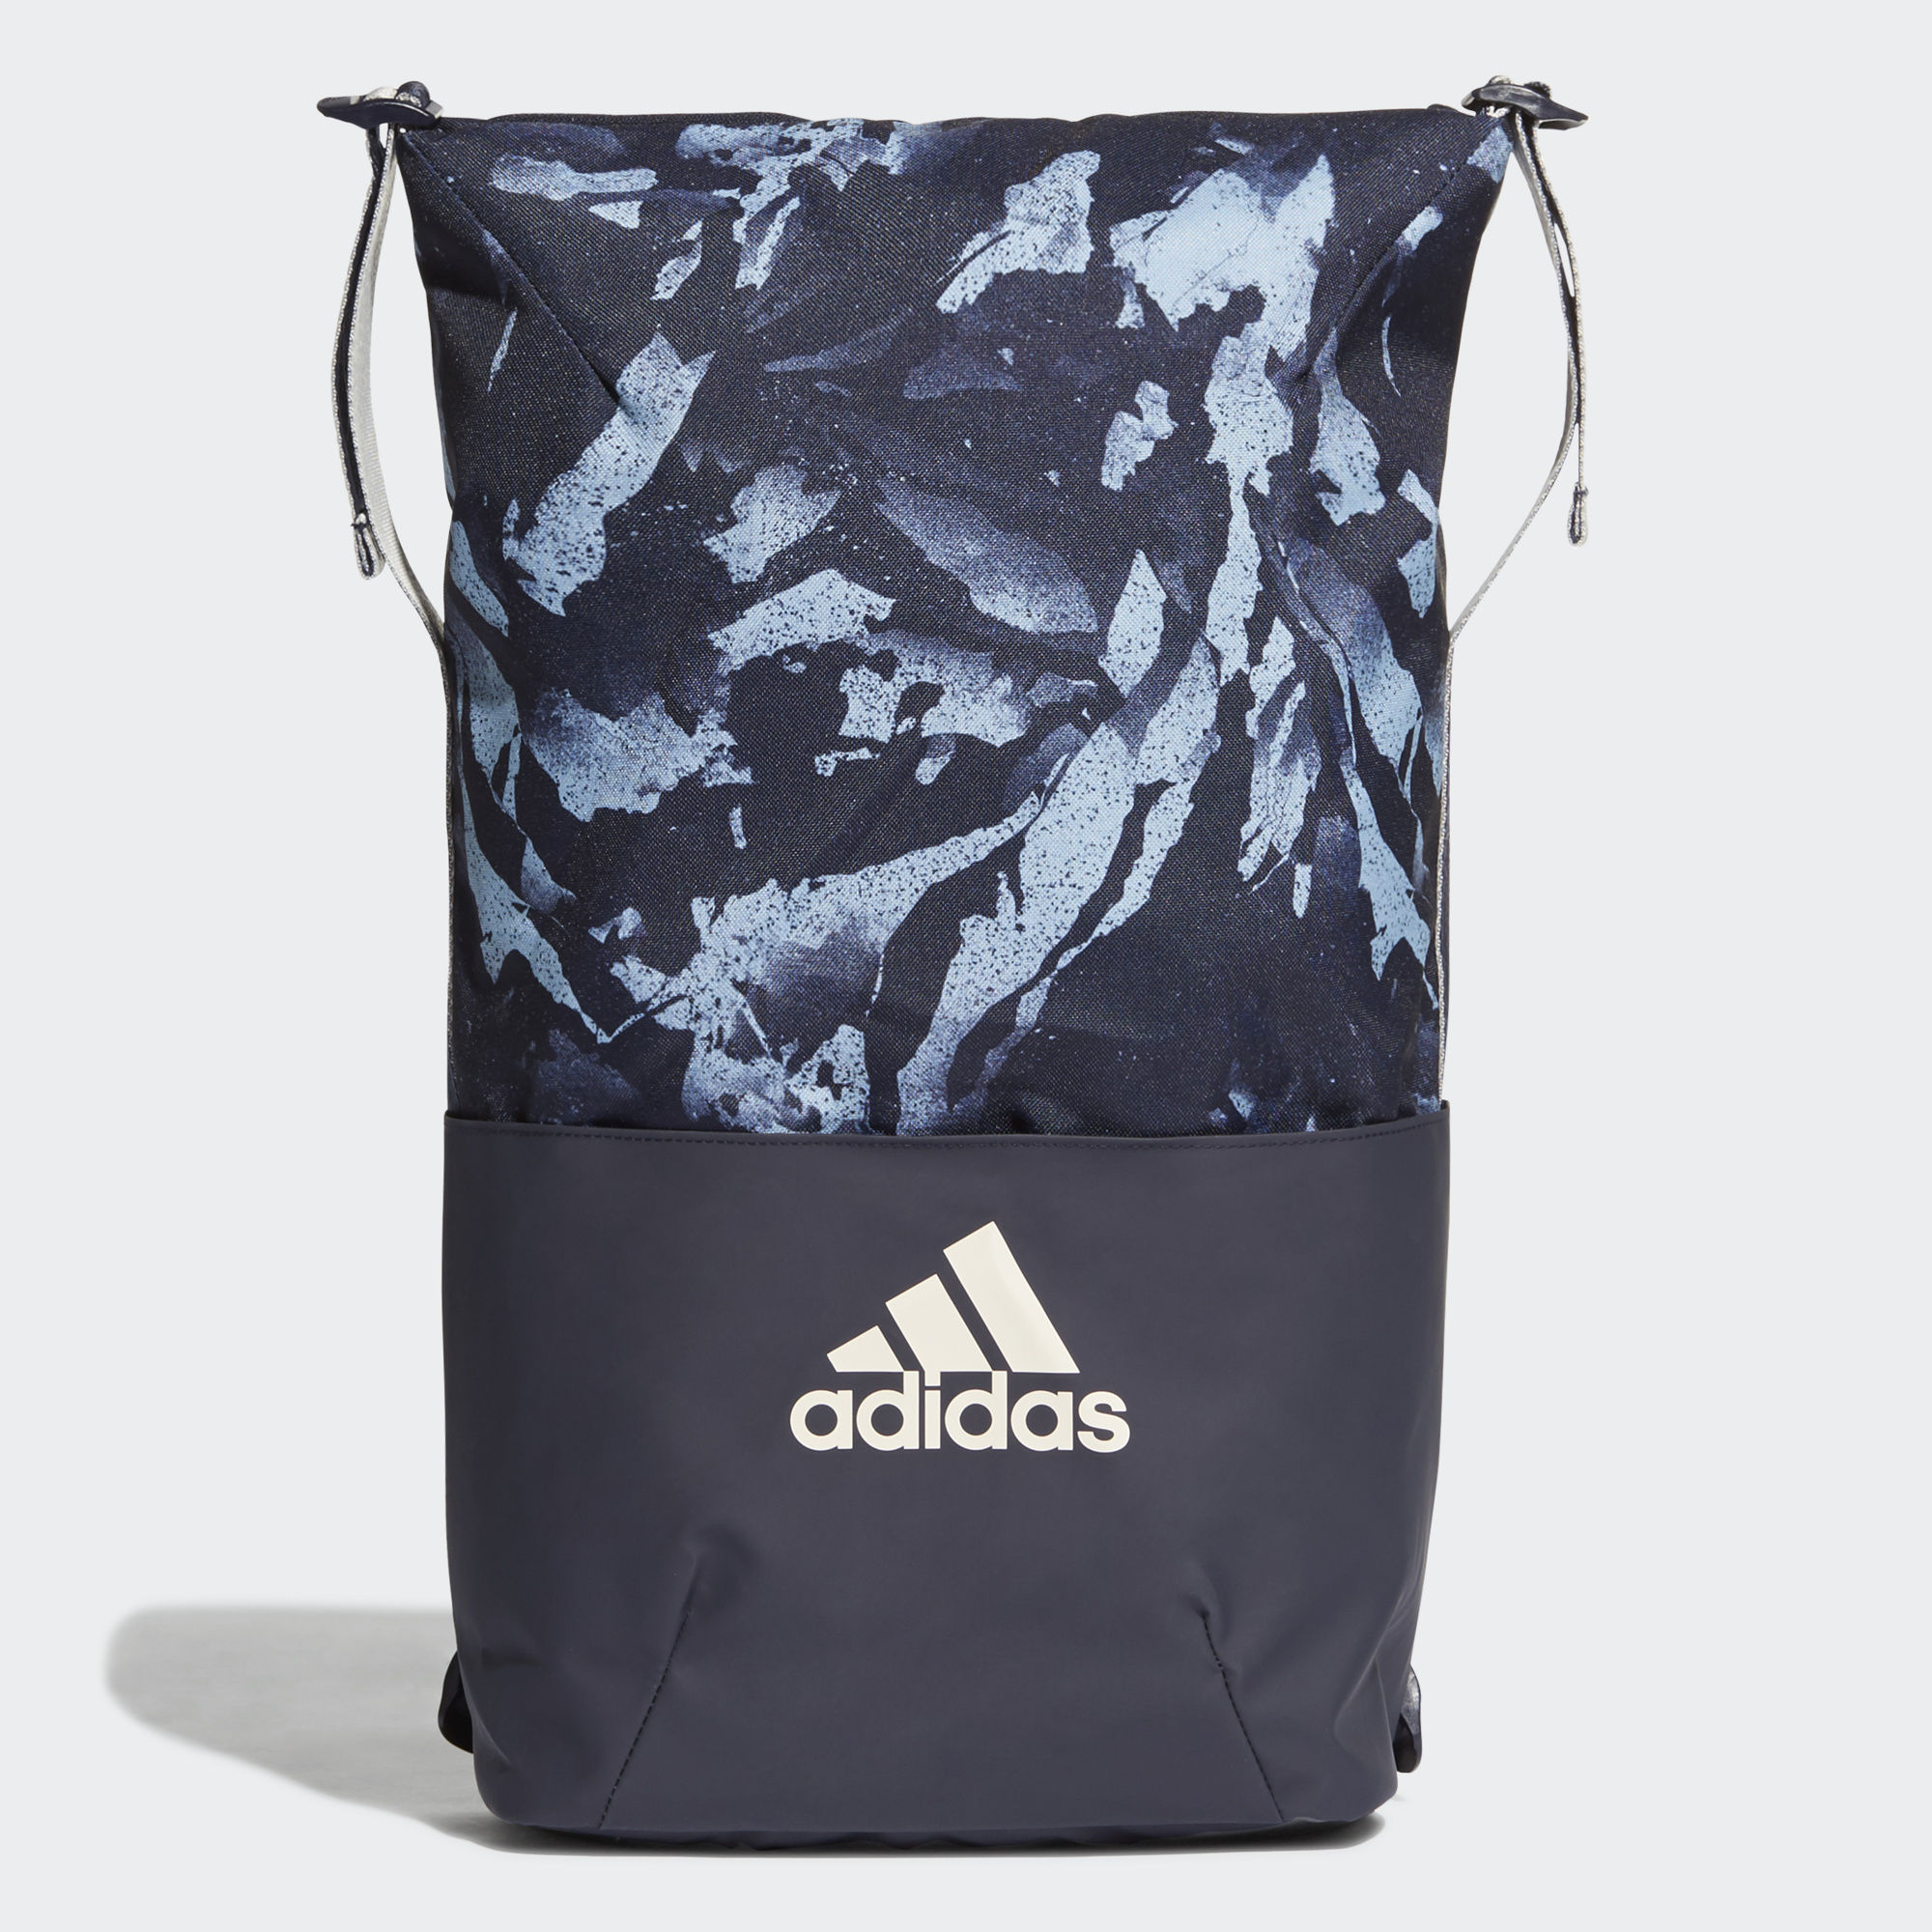 ADIDAS ZNE CORE GRAPHIC BACKPACK 